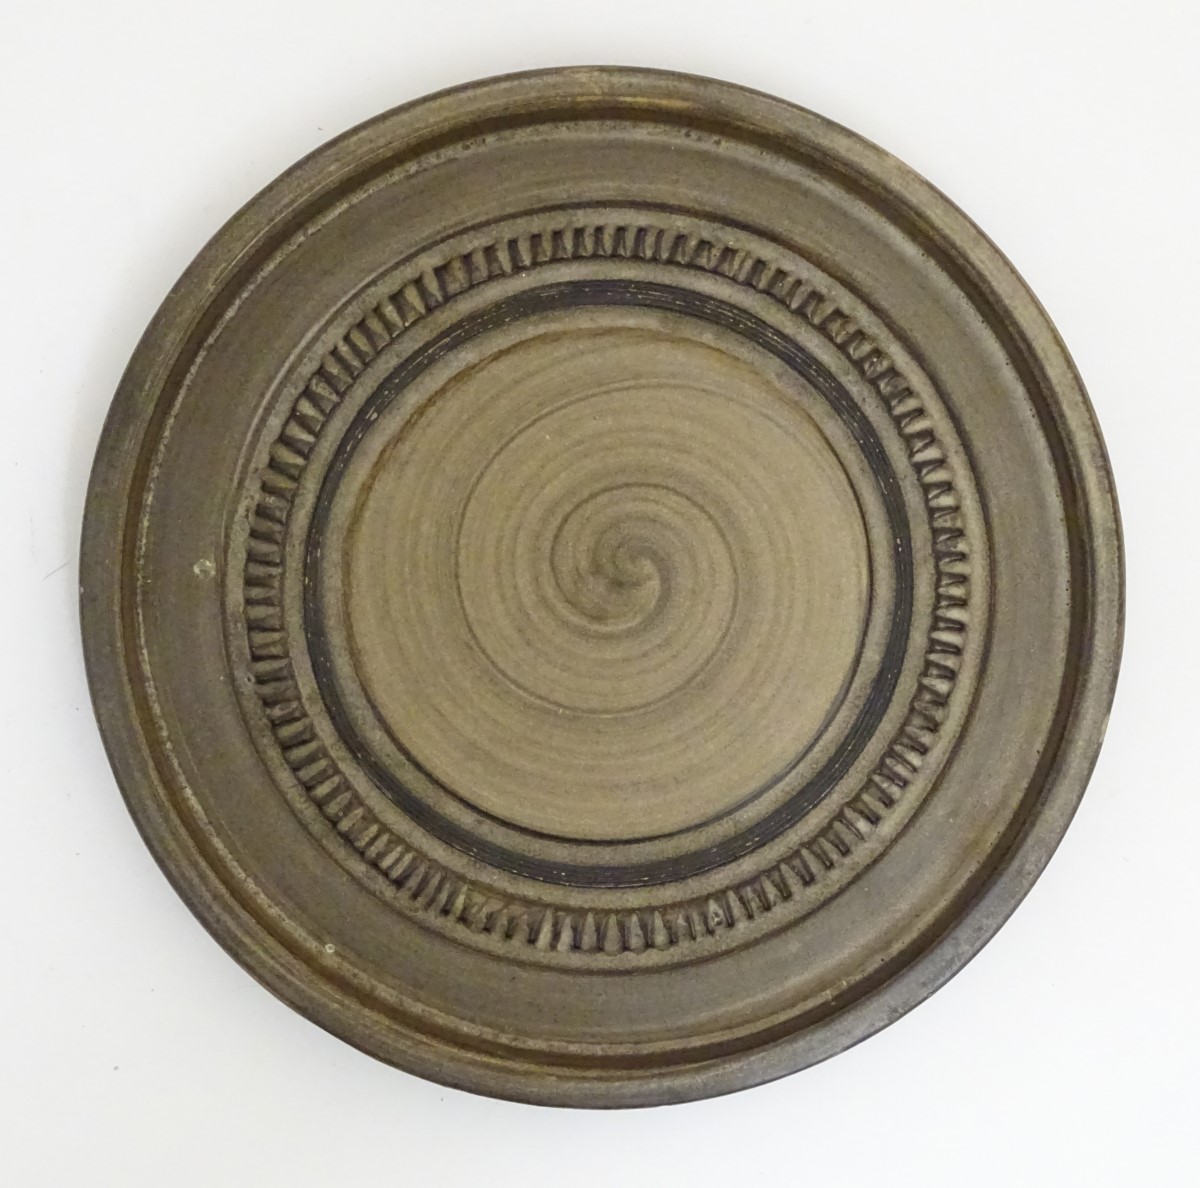 Scandinavian Studio Pottery: mid 20thC A brown Swedish plate by Yourstone,